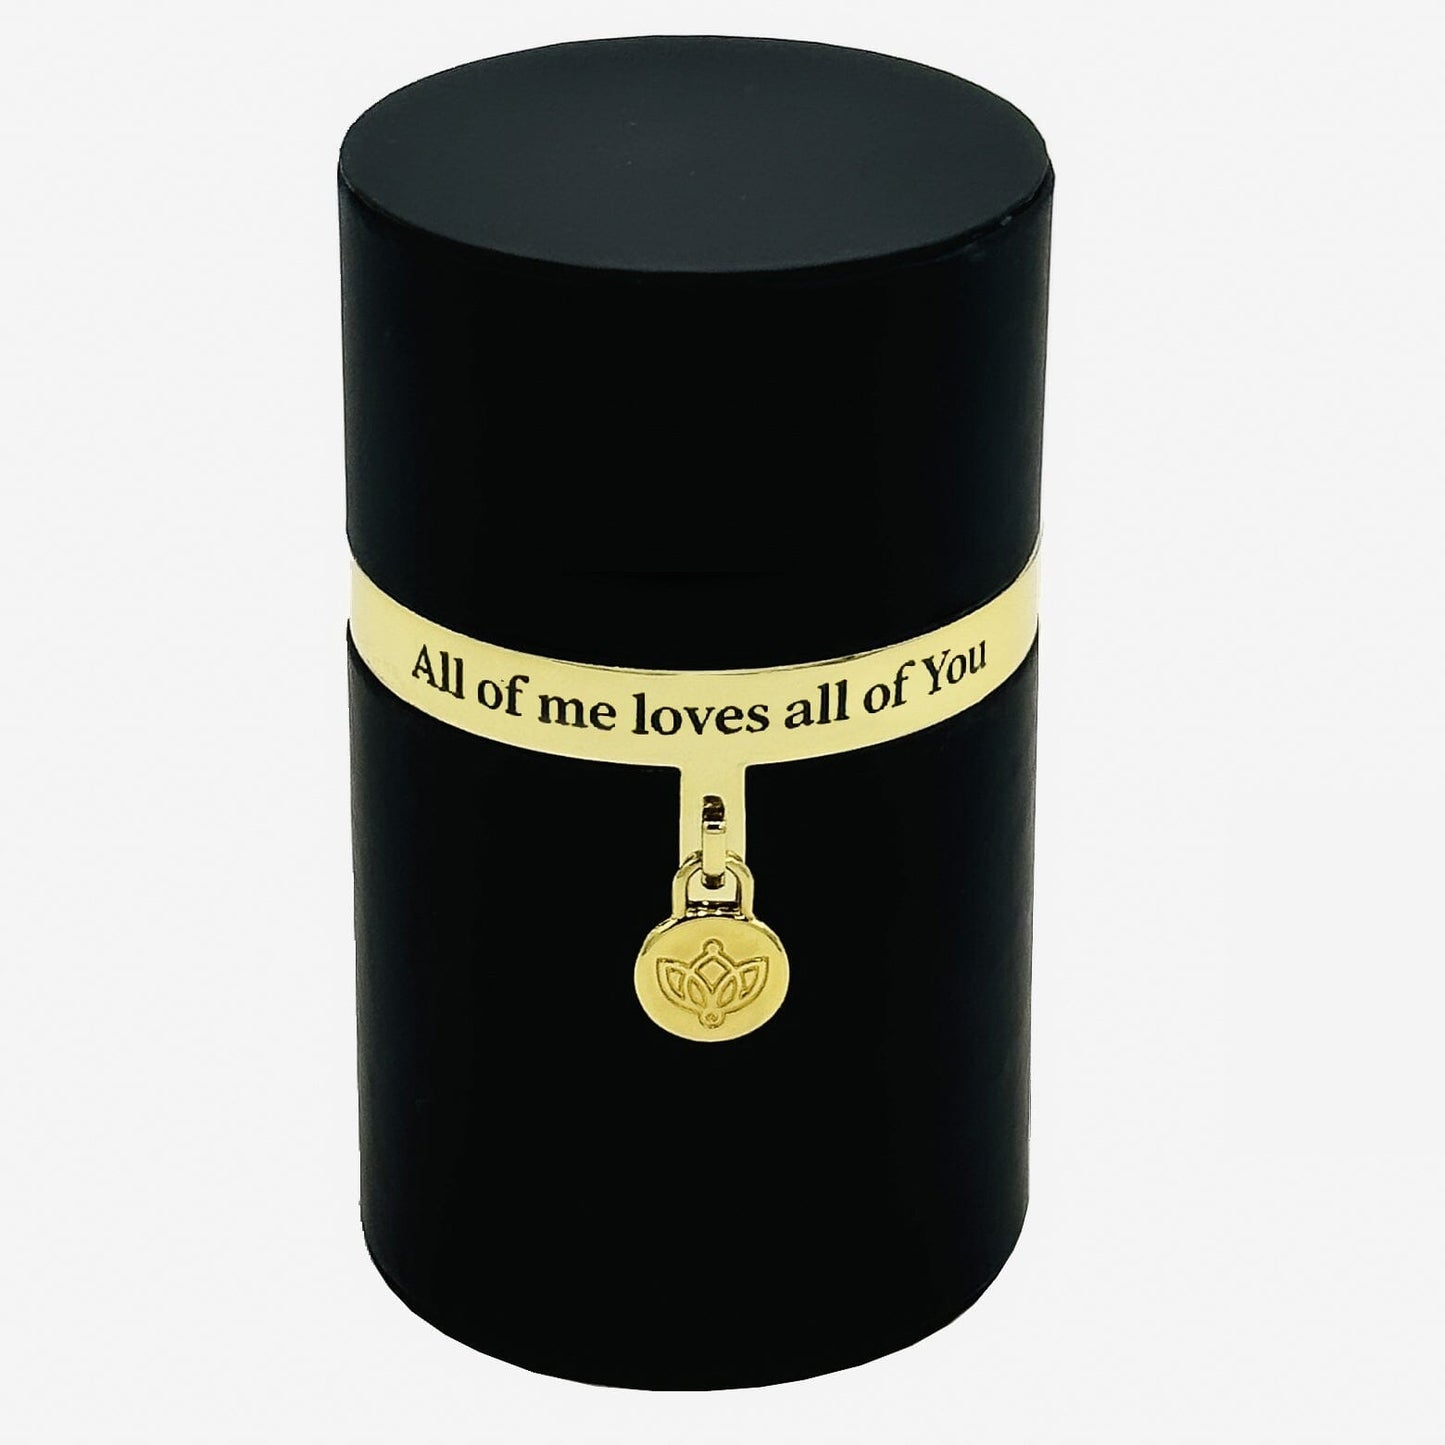 One in a Million™ Round Black Box | All of me loves all of You | Red Rose